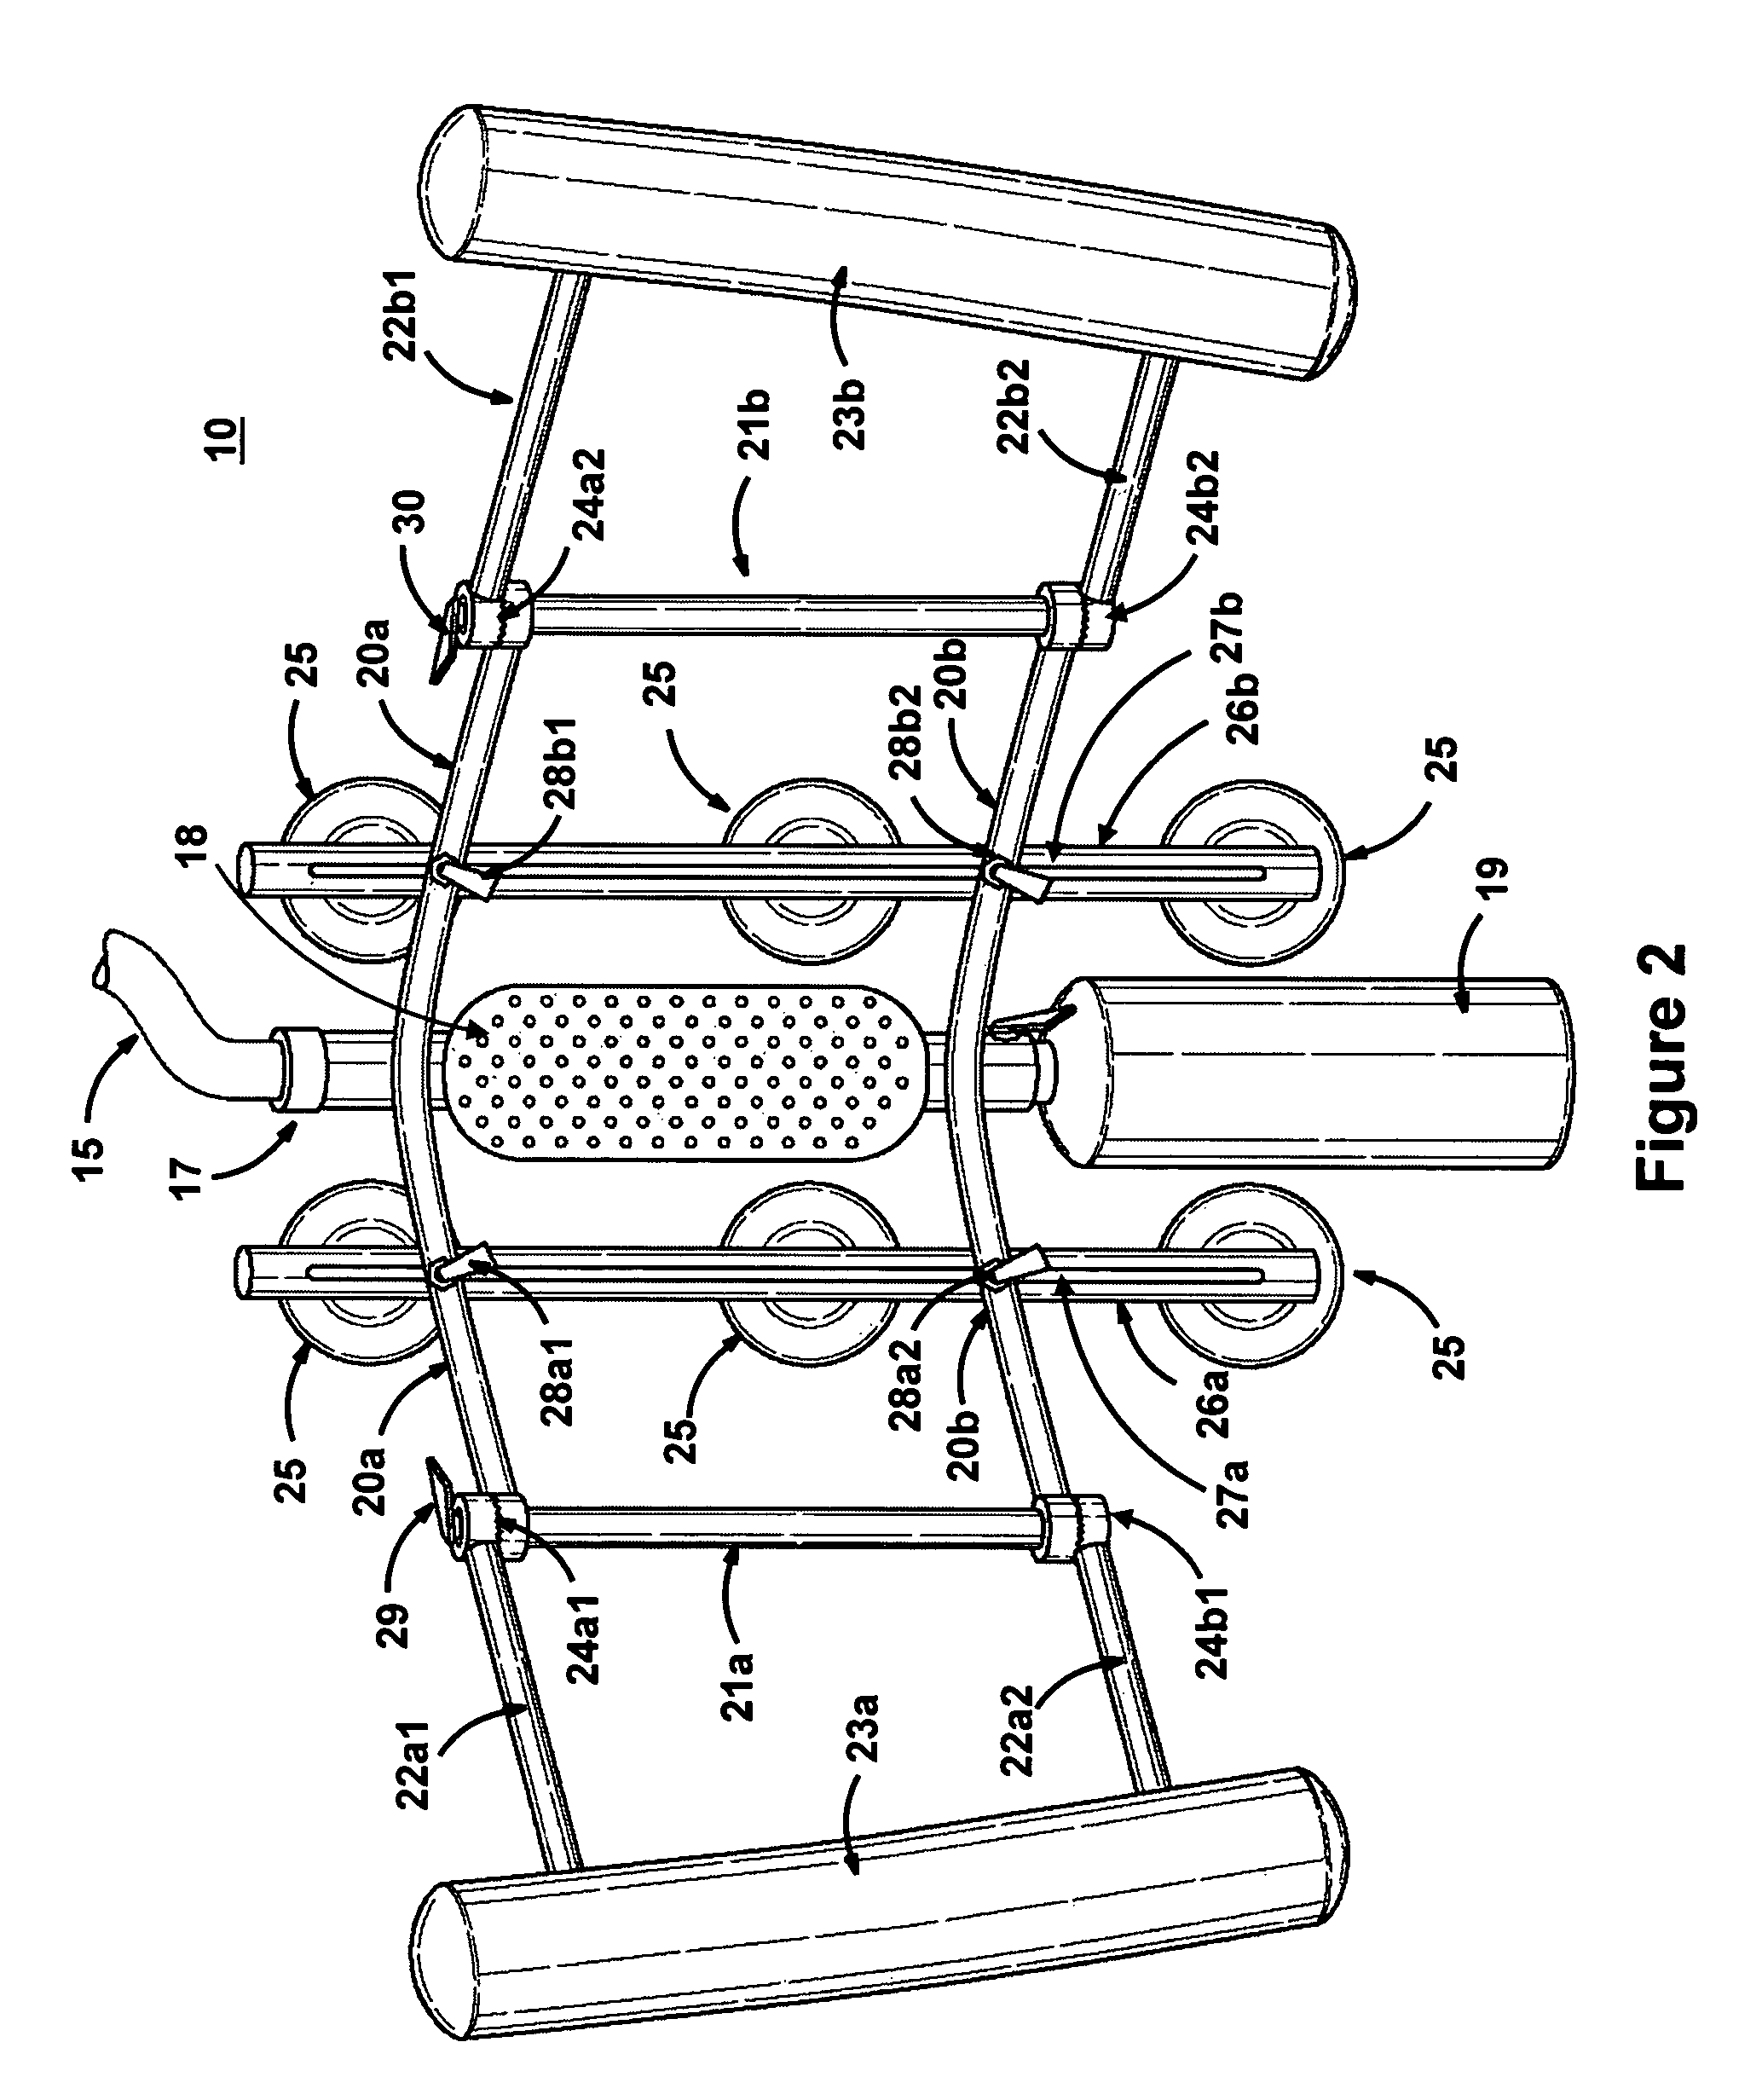 Personal hygiene cleansing and irrigation device